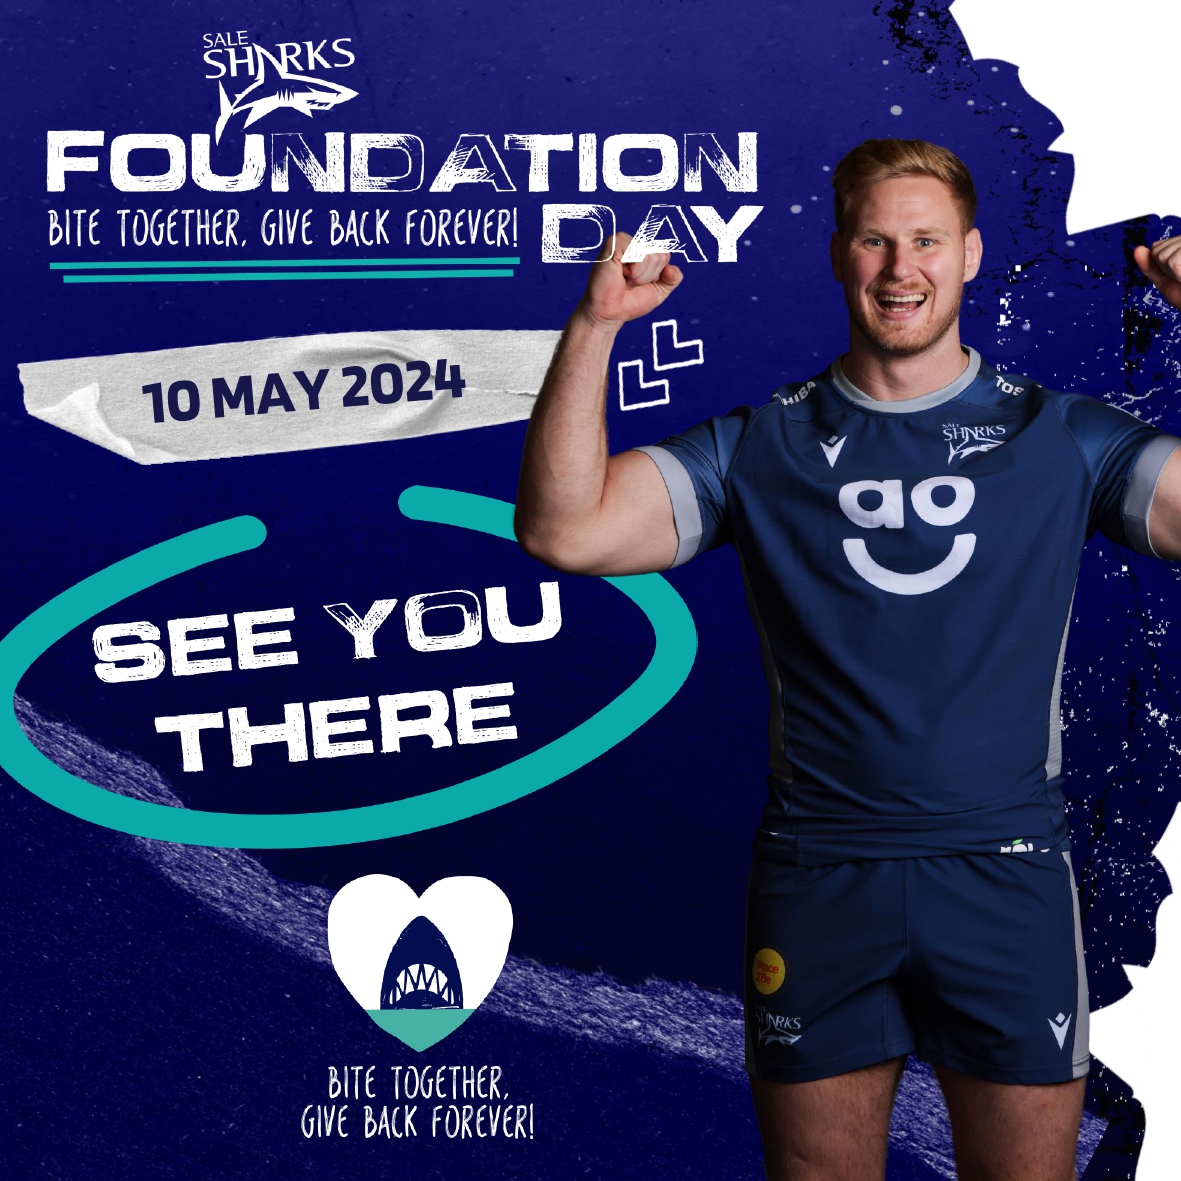 𝗦𝗛𝗔𝗥𝗞 𝗧𝗜𝗠𝗘 🦈 We can’t wait to see the #SharksFamily at Foundation Day today! Make sure you play some inflatable rugby, sign our Wall of Pride and get your photo at the Stadium 📸 #SharksFamily